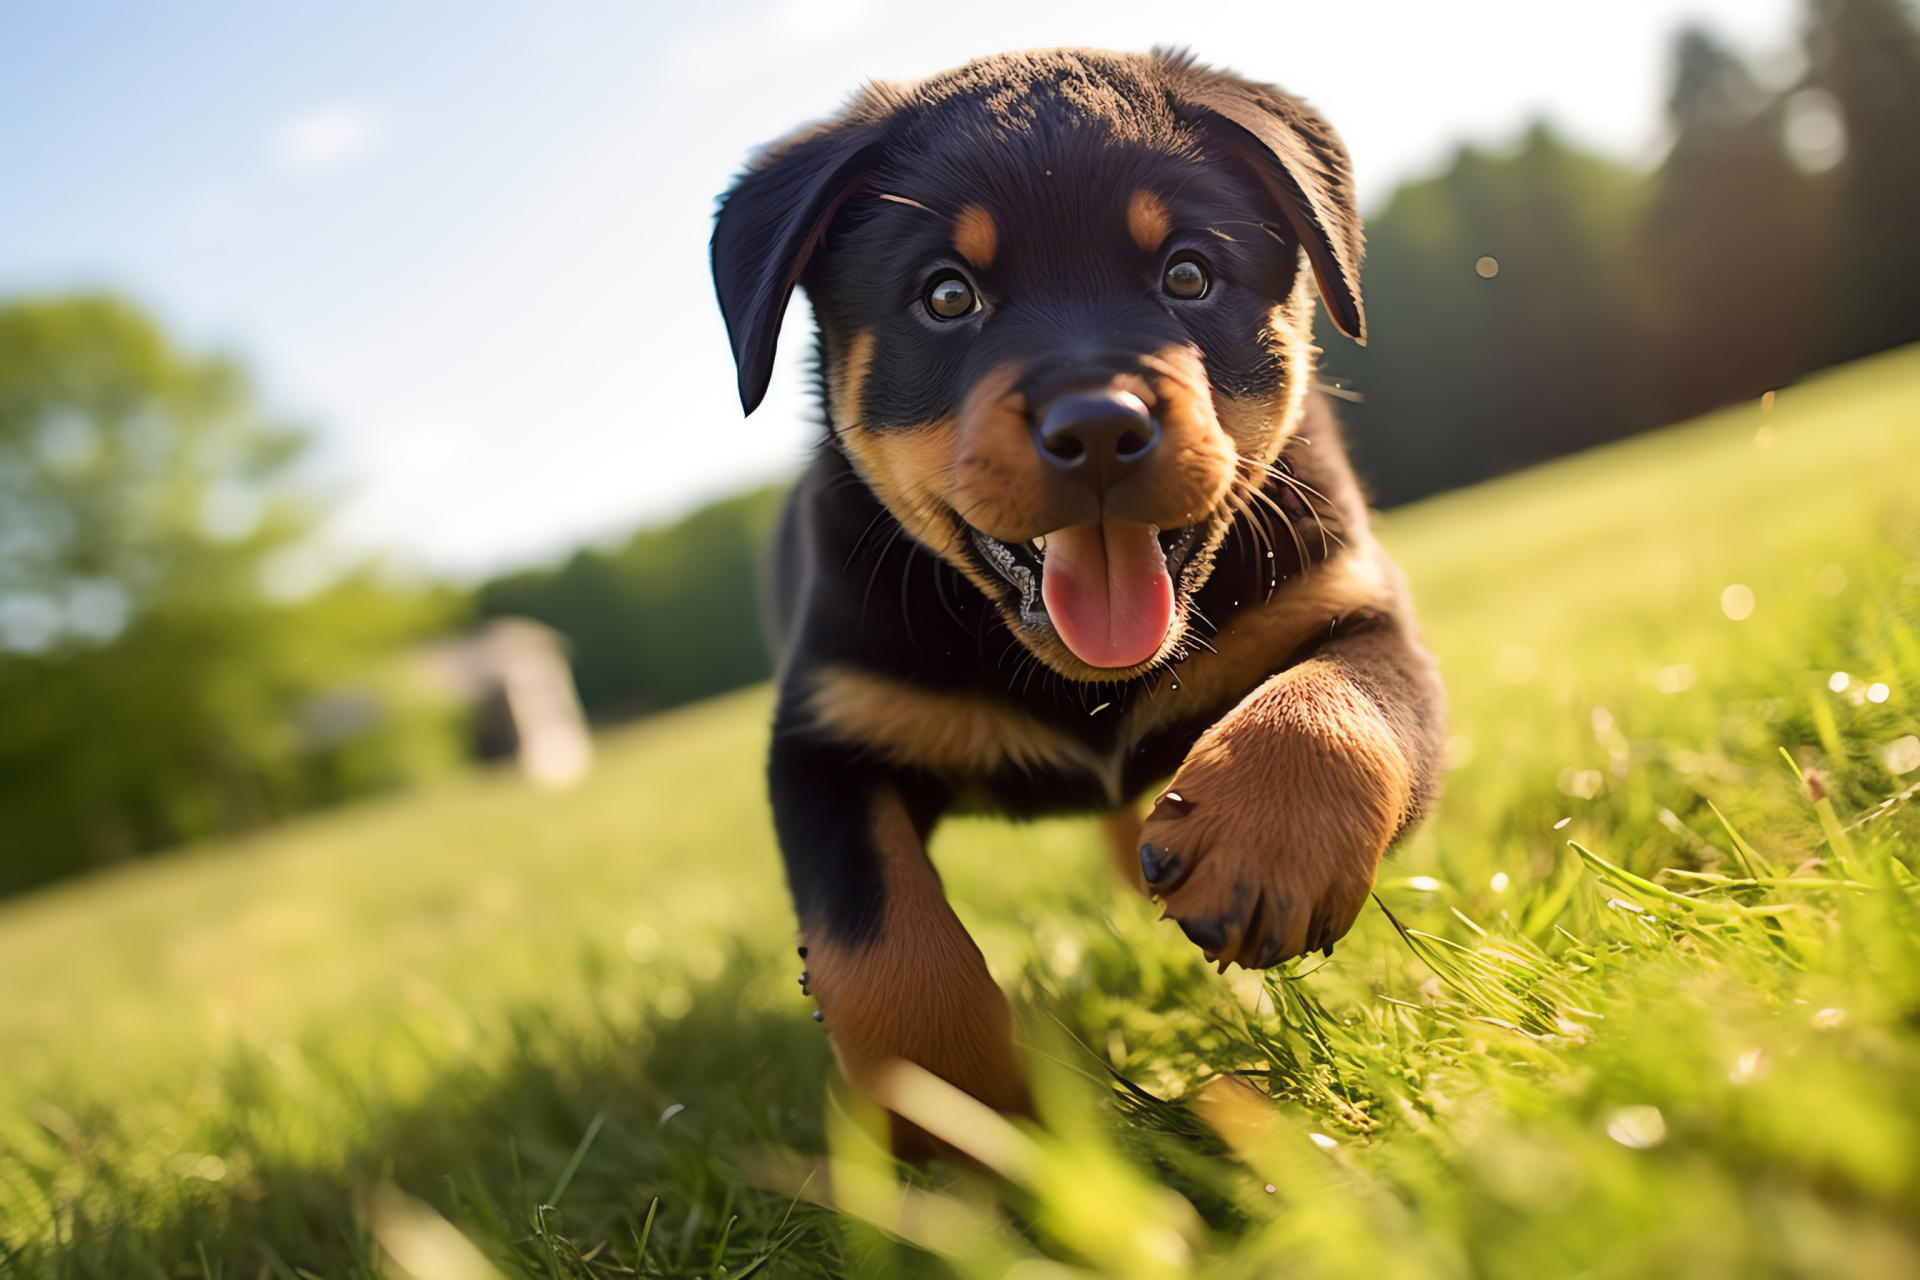 Rottweiler puppy, Canine play, Youthful energy, Puppy fur, Pastoral scene, HD Desktop Image